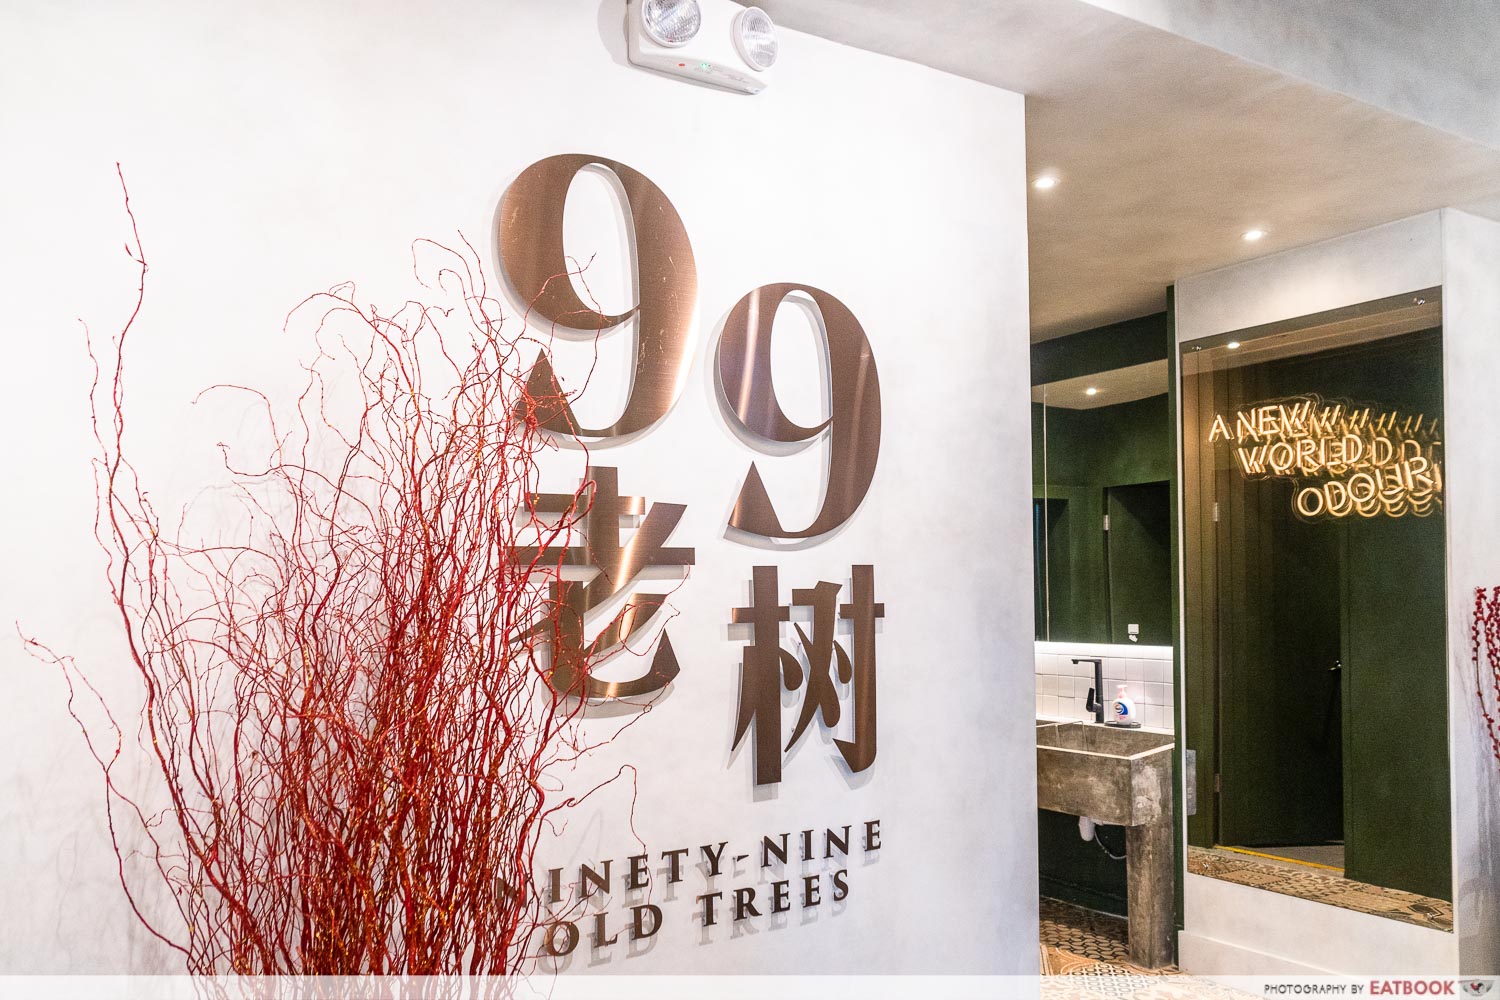 99 old trees ambience logo